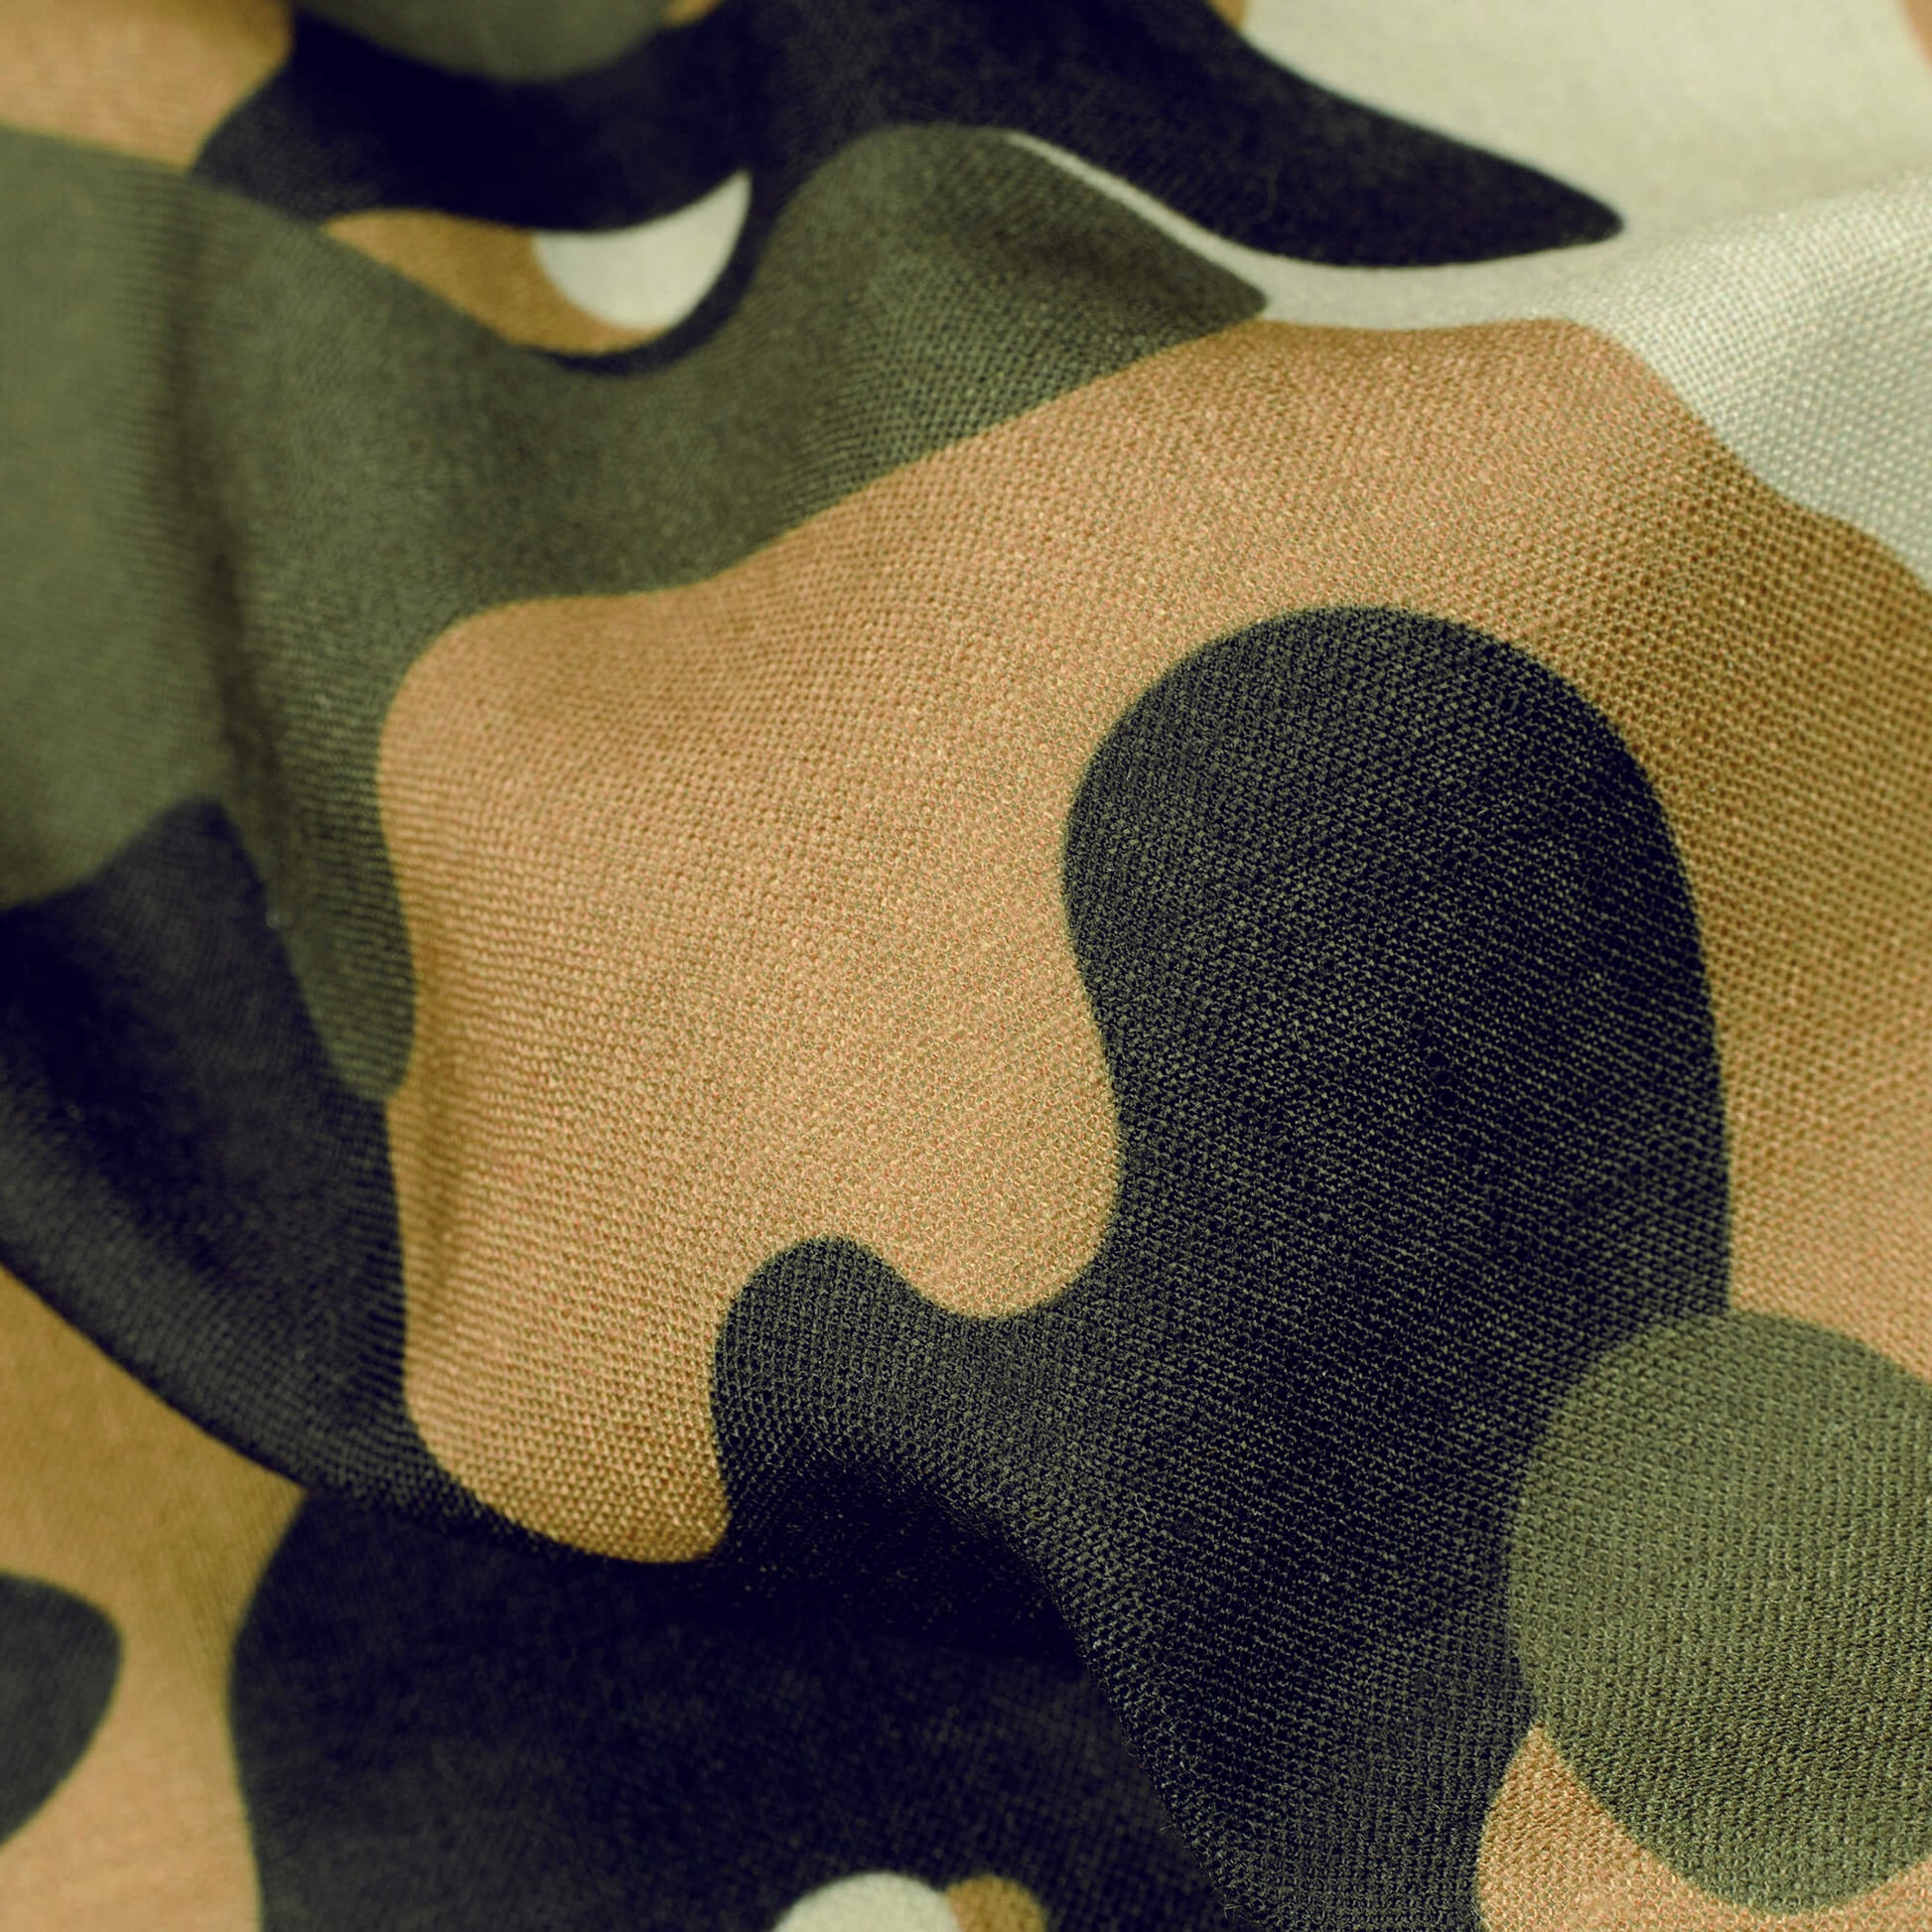 Black And Pecan Brown Camouflage Digital Print Linen Textured Fabric (Width 56 Inches) - Fabcurate